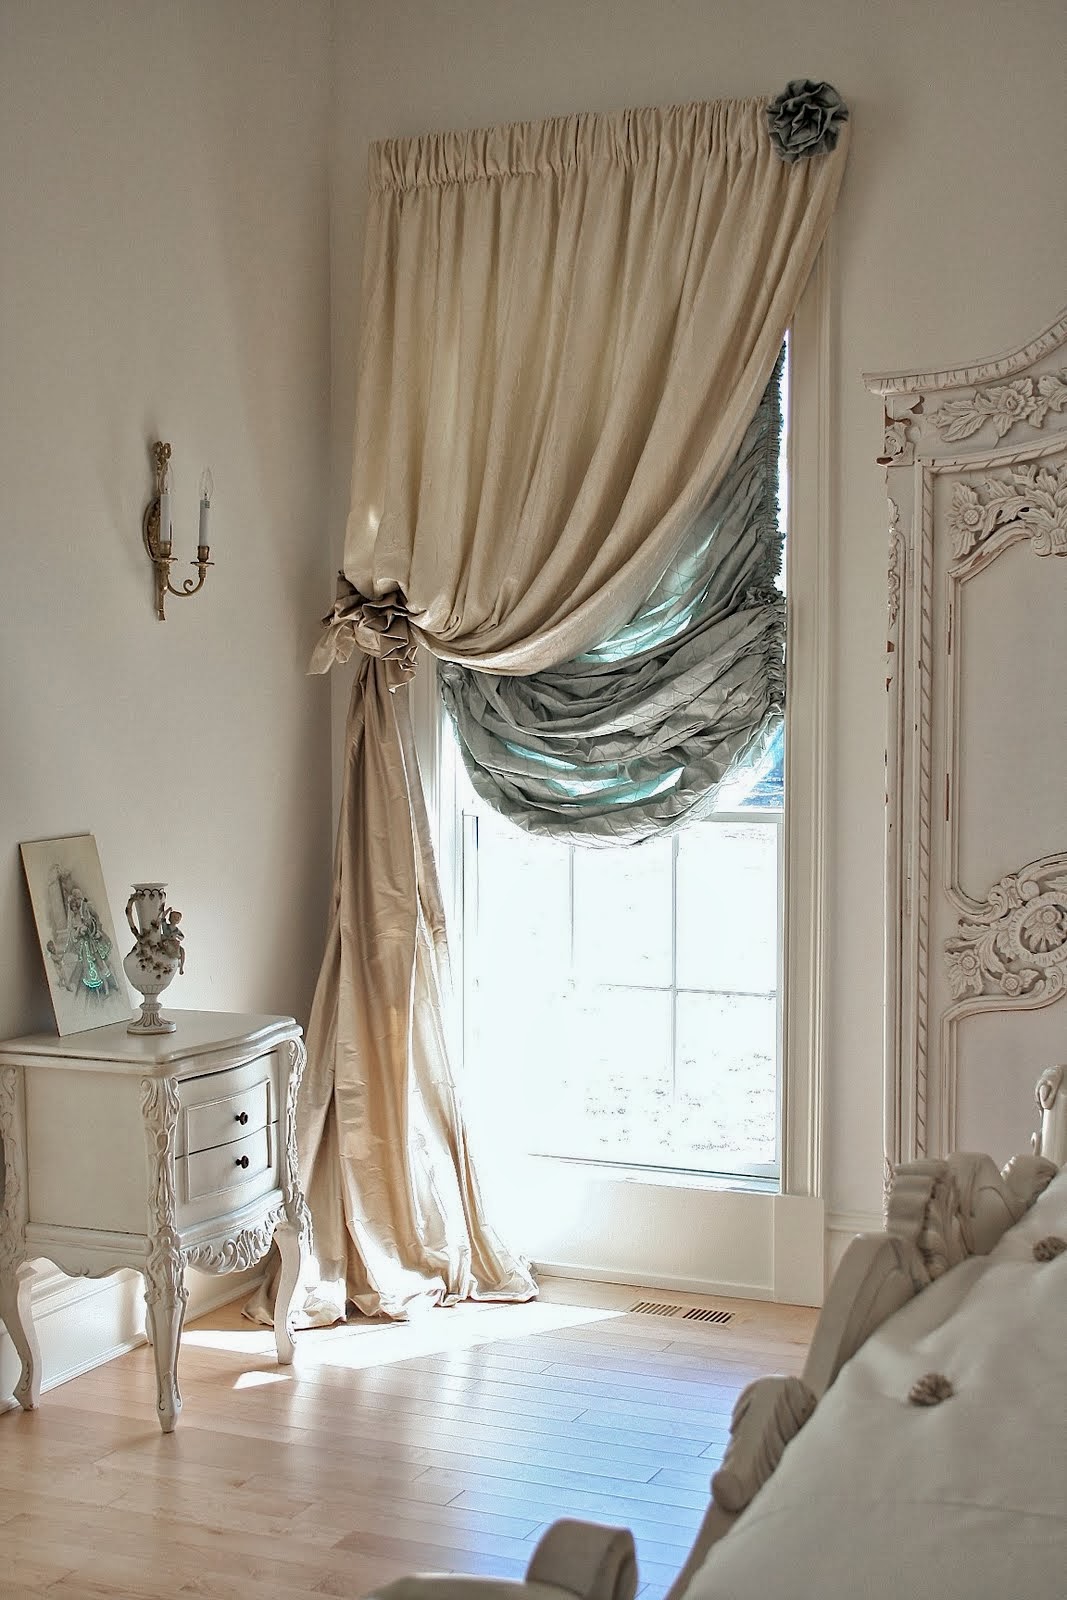 Romancing+the+room+by+cool+chic+style+fashion+(5)